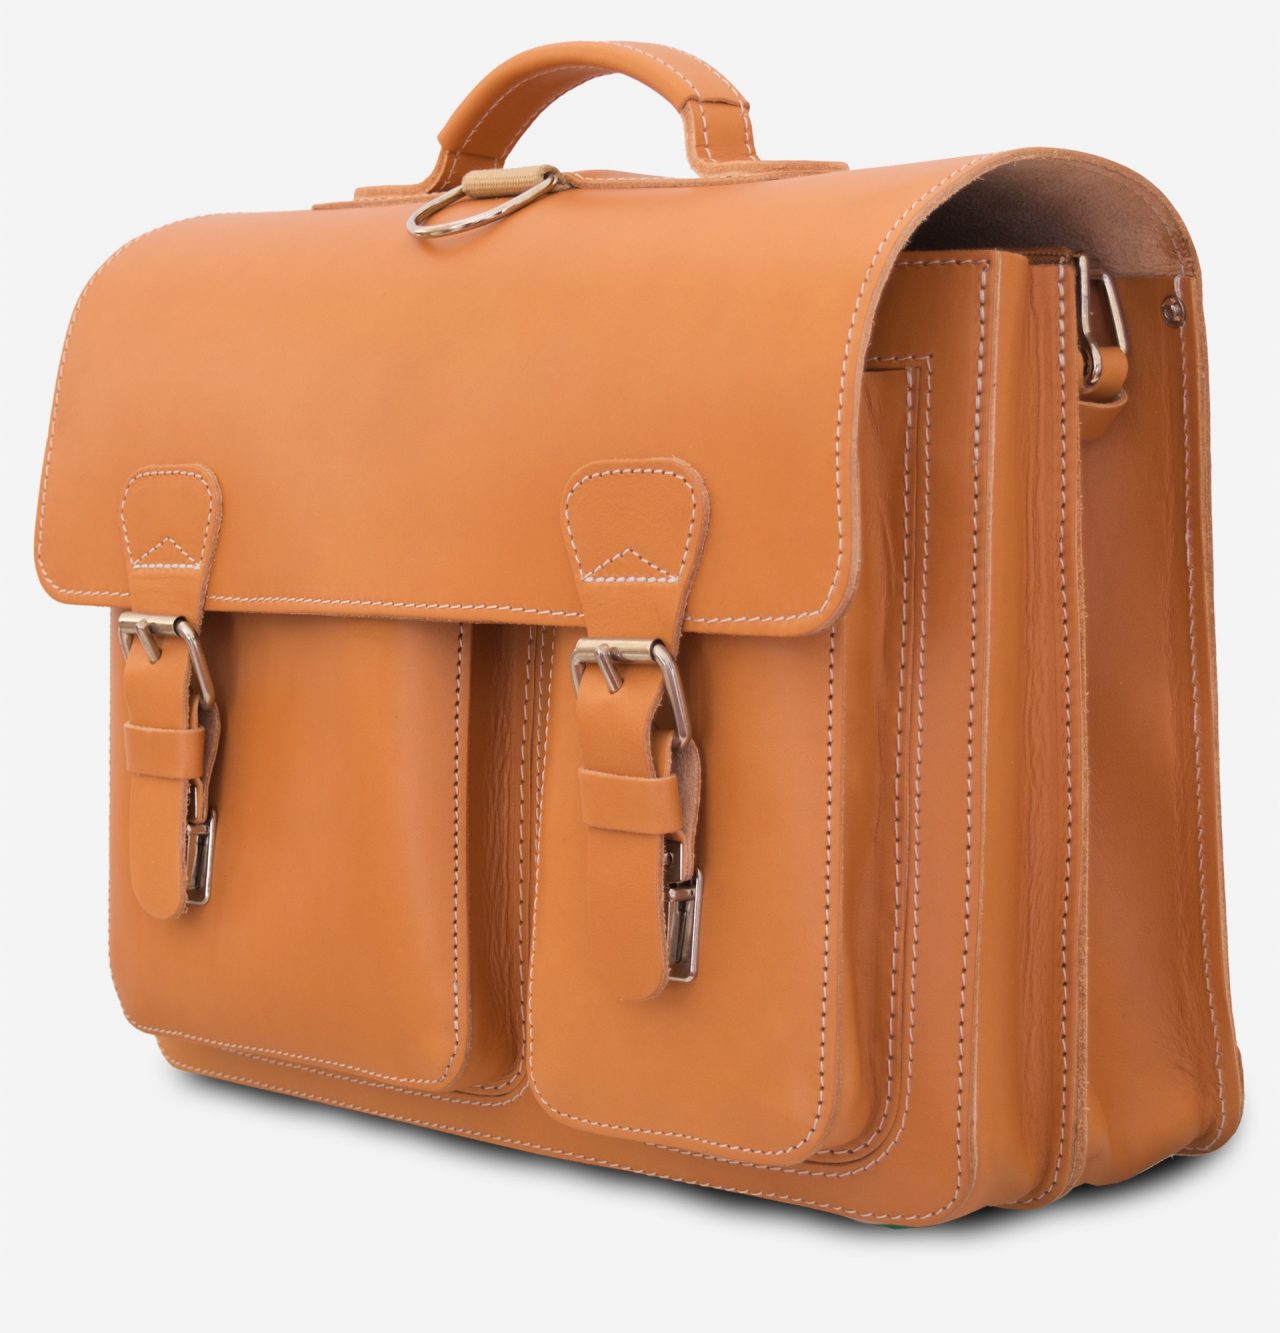 Side view of tan leather satchel with 2 compartments and 2 front asymmetric pockets.